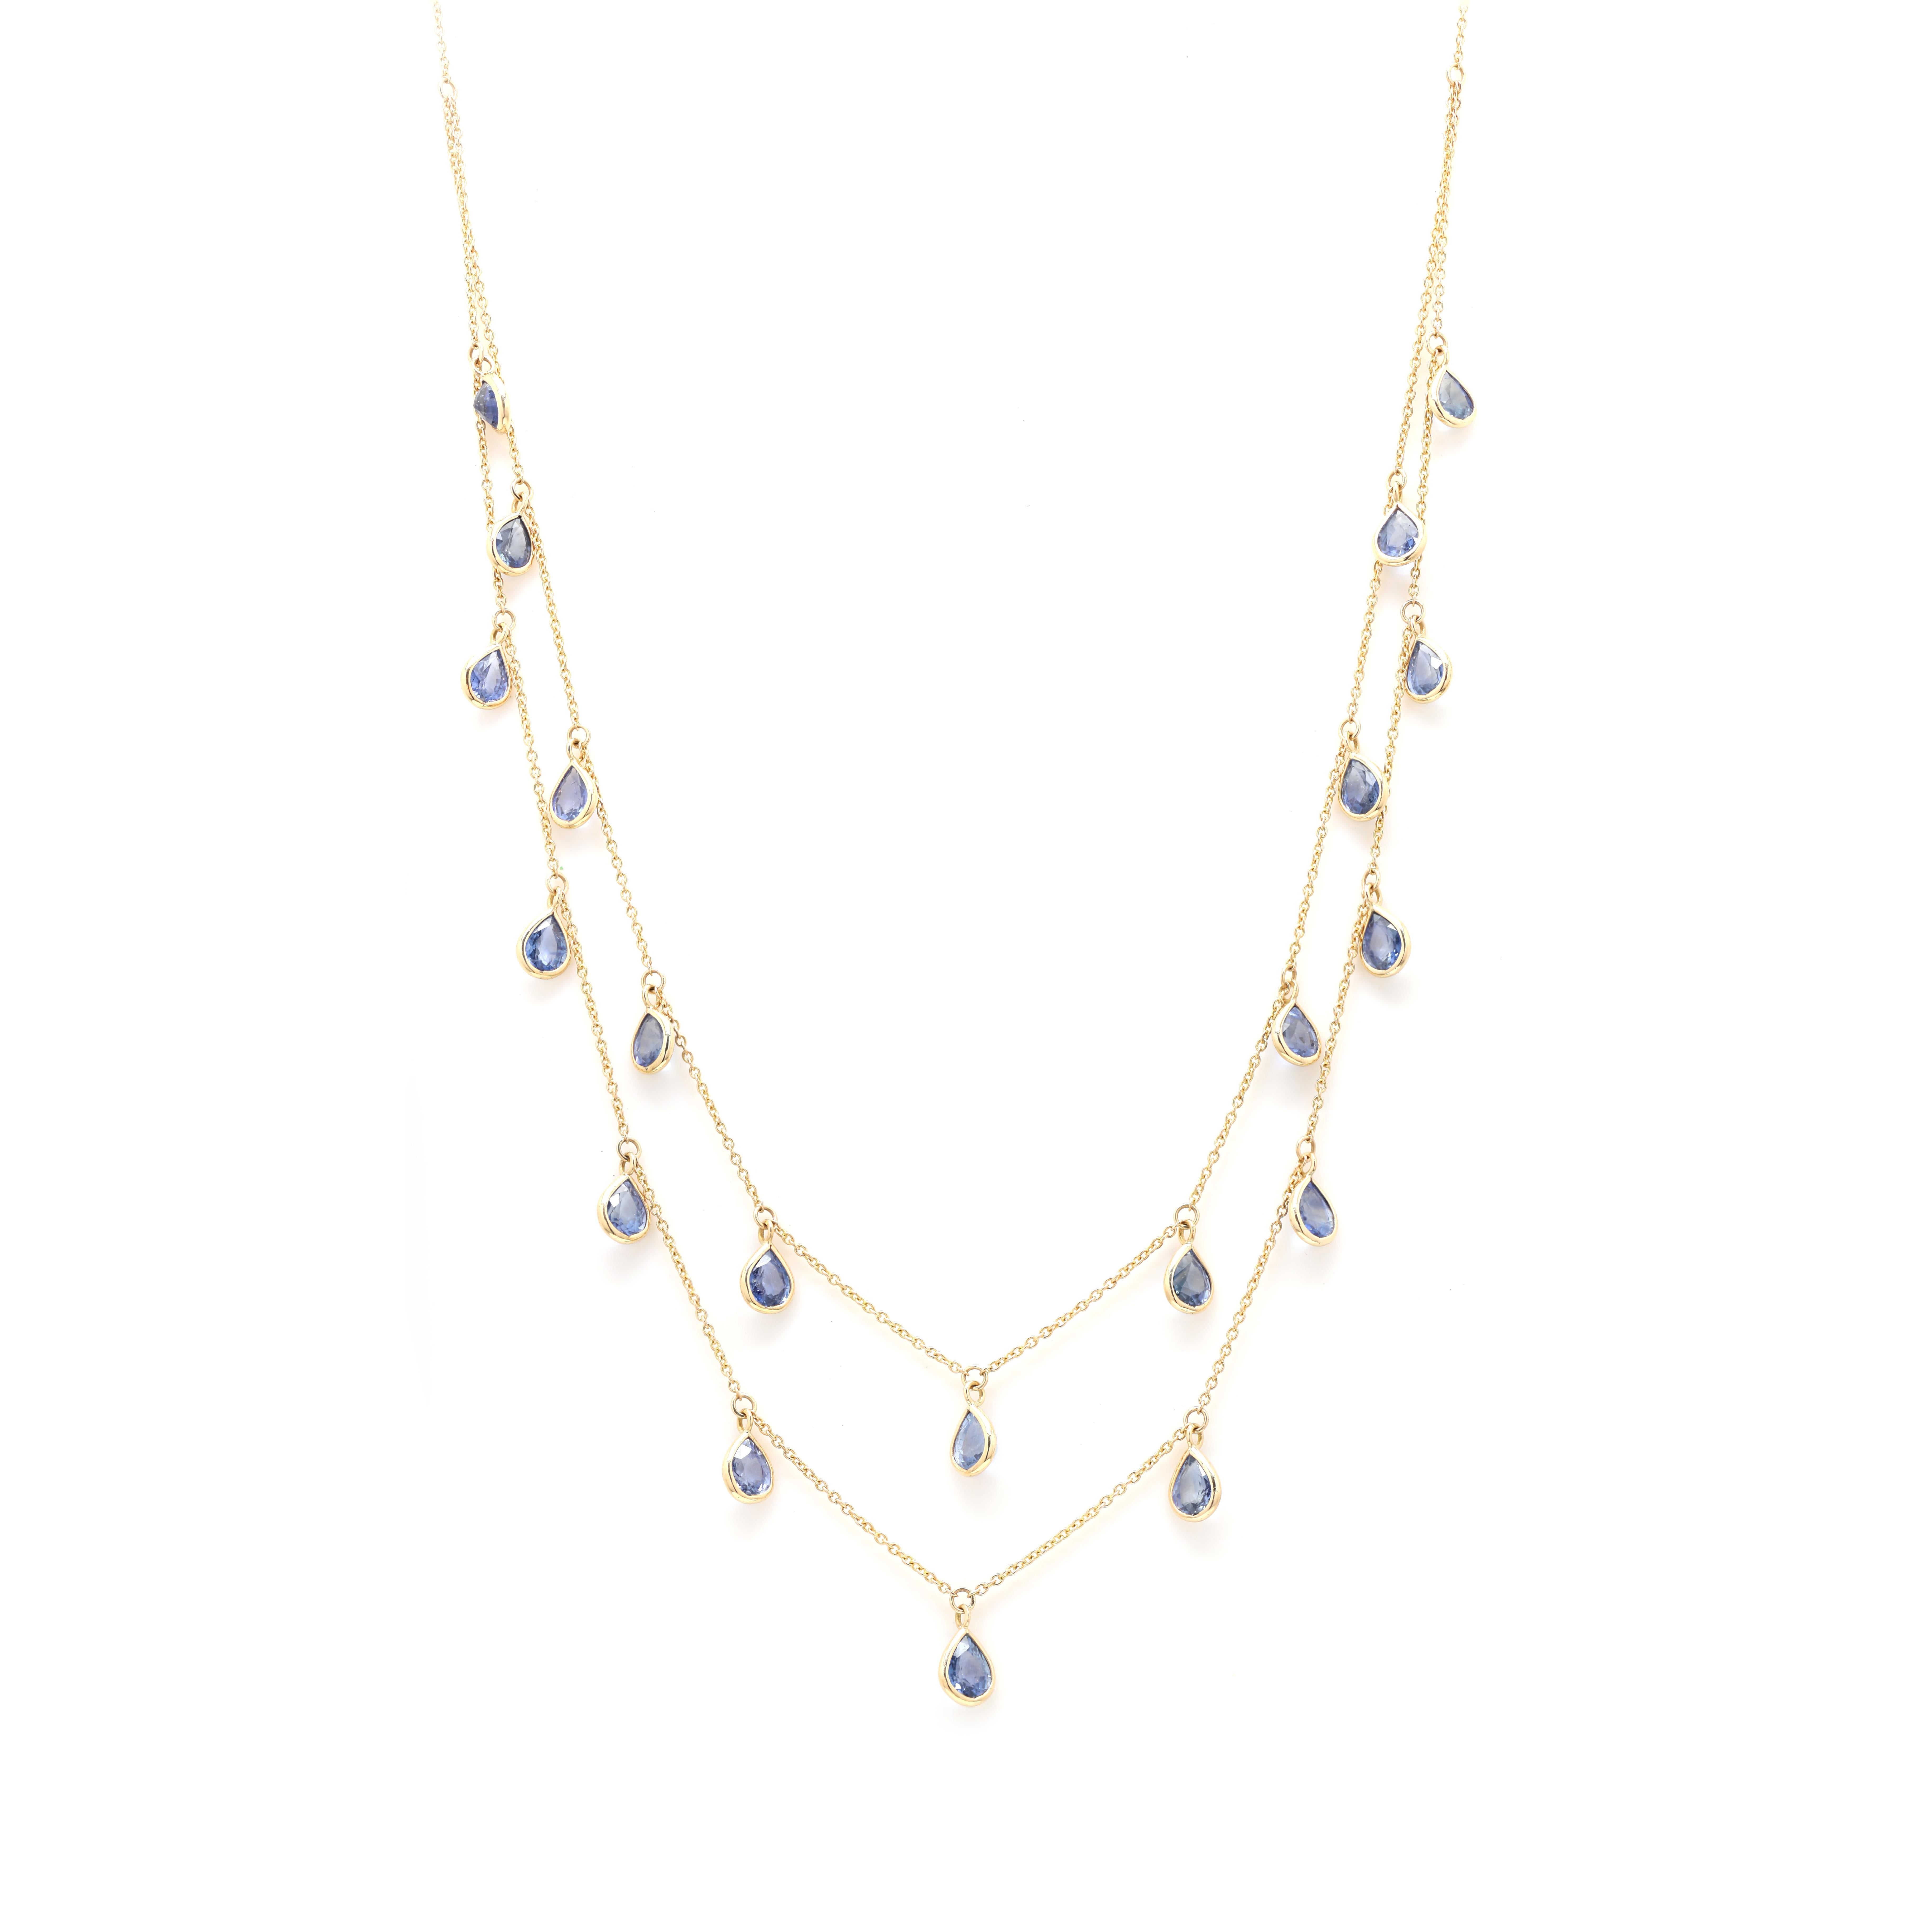 Sapphire Two Strand Chain Necklace studded with pear cut sapphire in 18k Gold. This stunning piece of jewelry instantly elevates a casual look or dressy outfit. 
Sapphire stimulates concentration and reduces stress.
Designed with pear cut sapphire